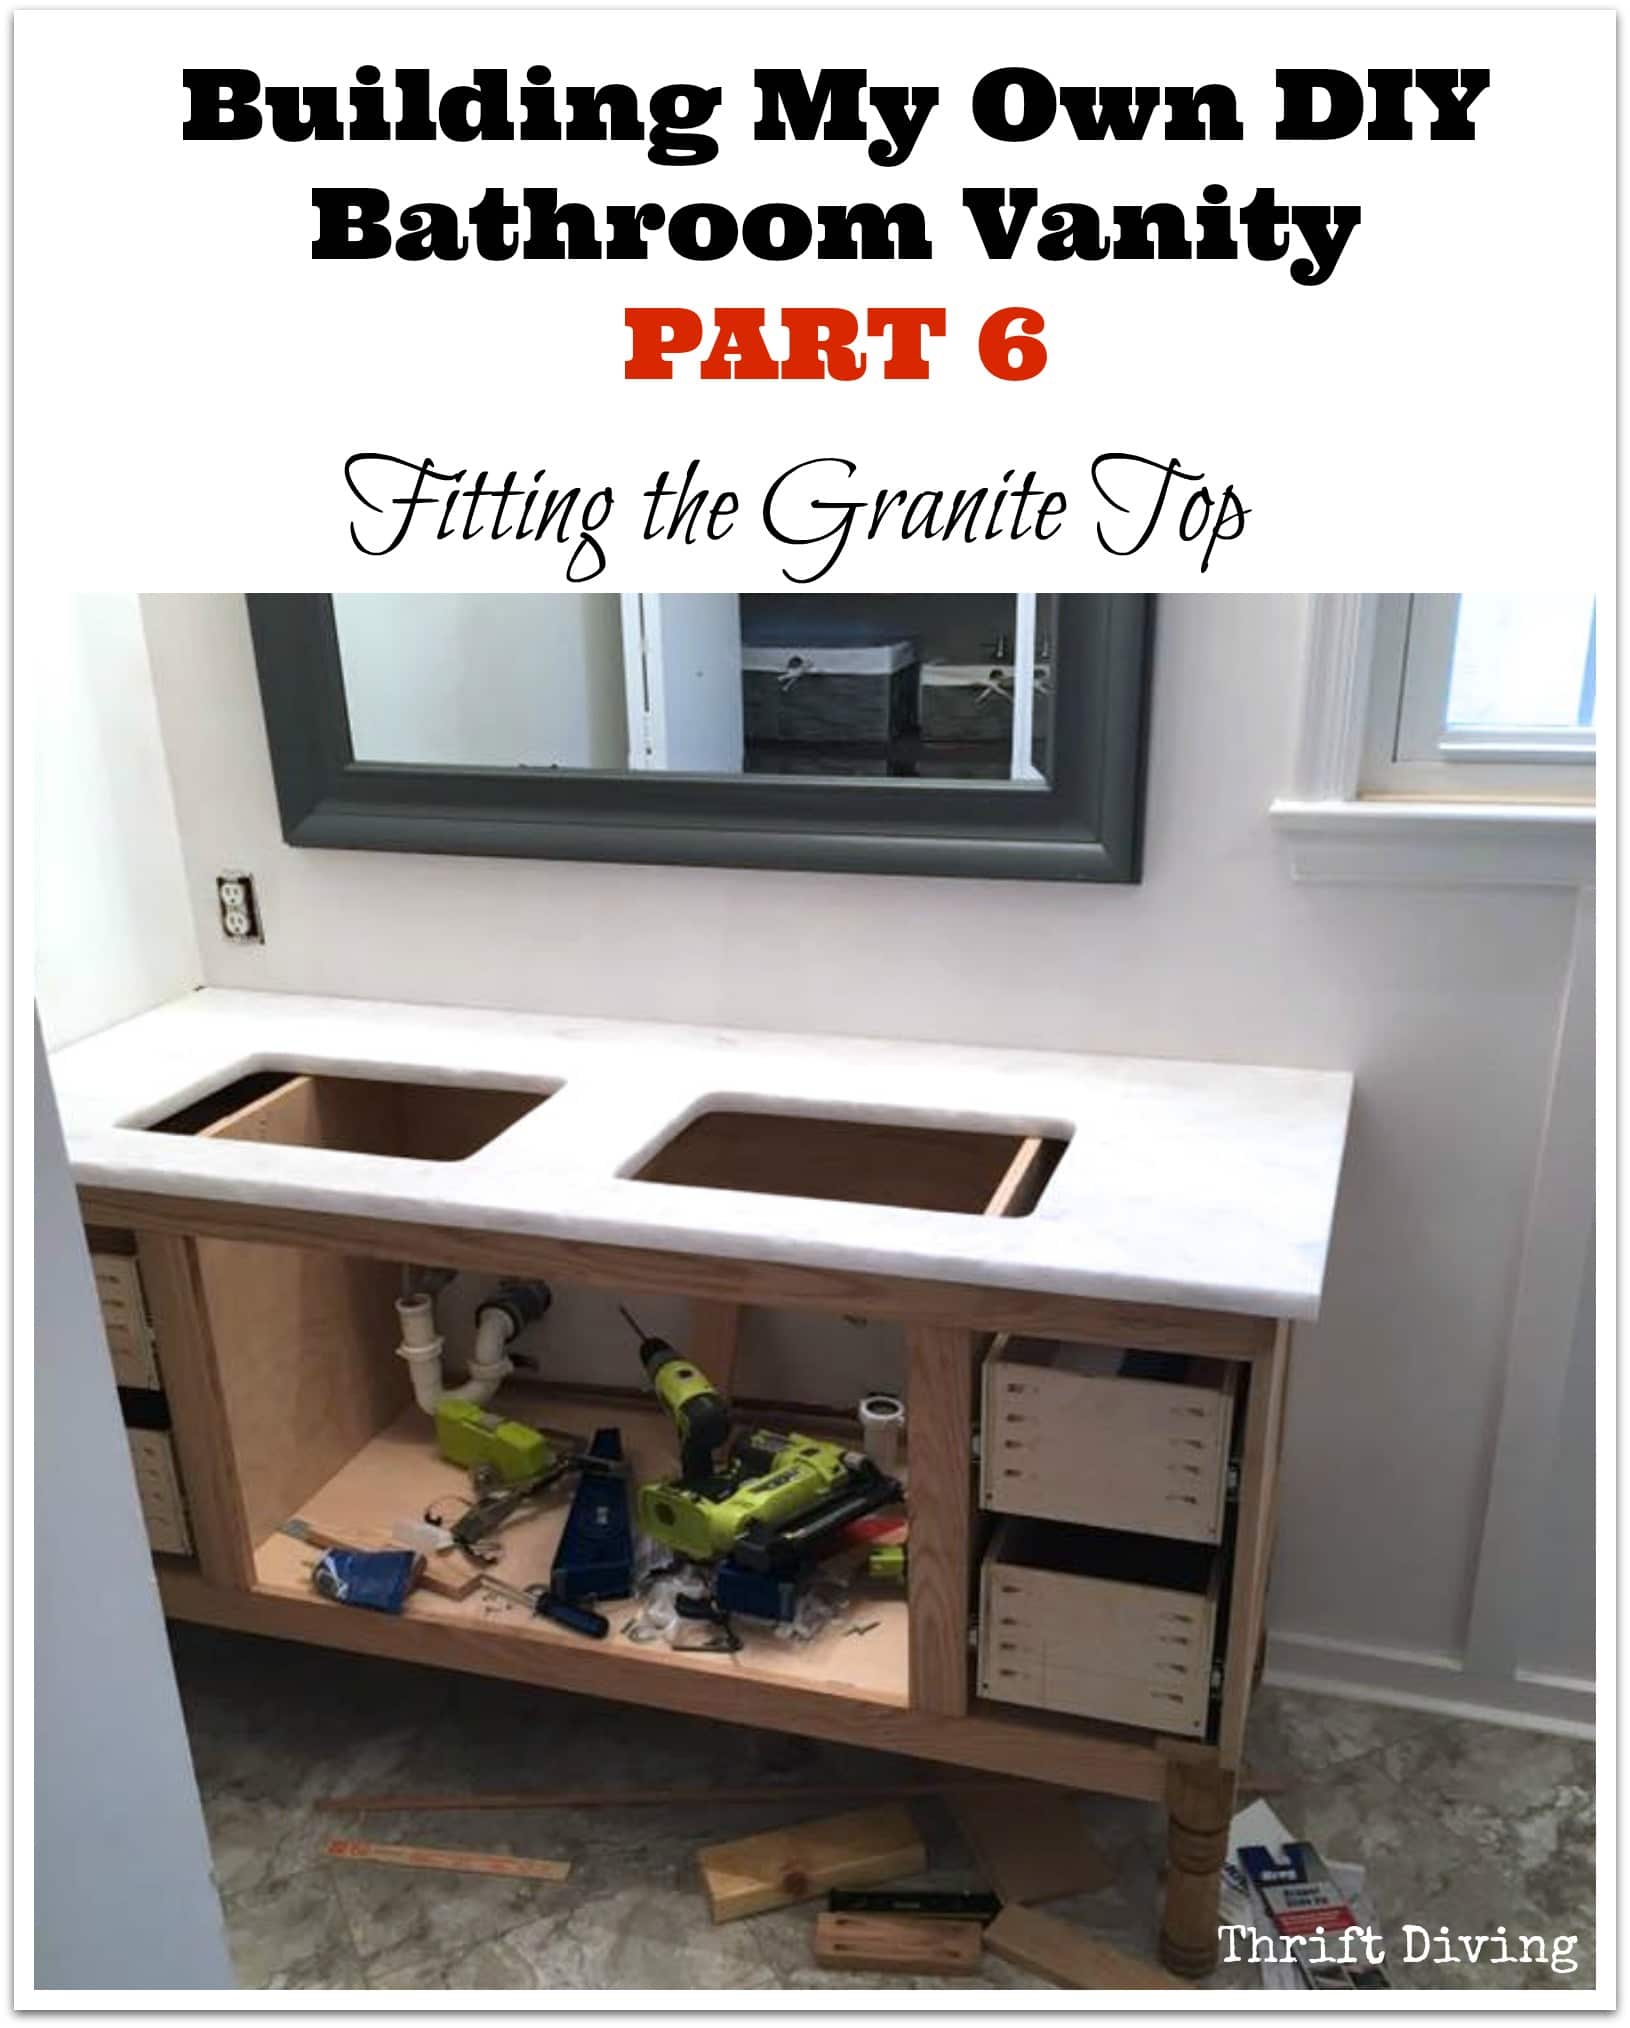 Building a DIY Bathroom Vanity - Part 6 - Fitting the Granite Top - See the whole series! Thrift Diving Blog